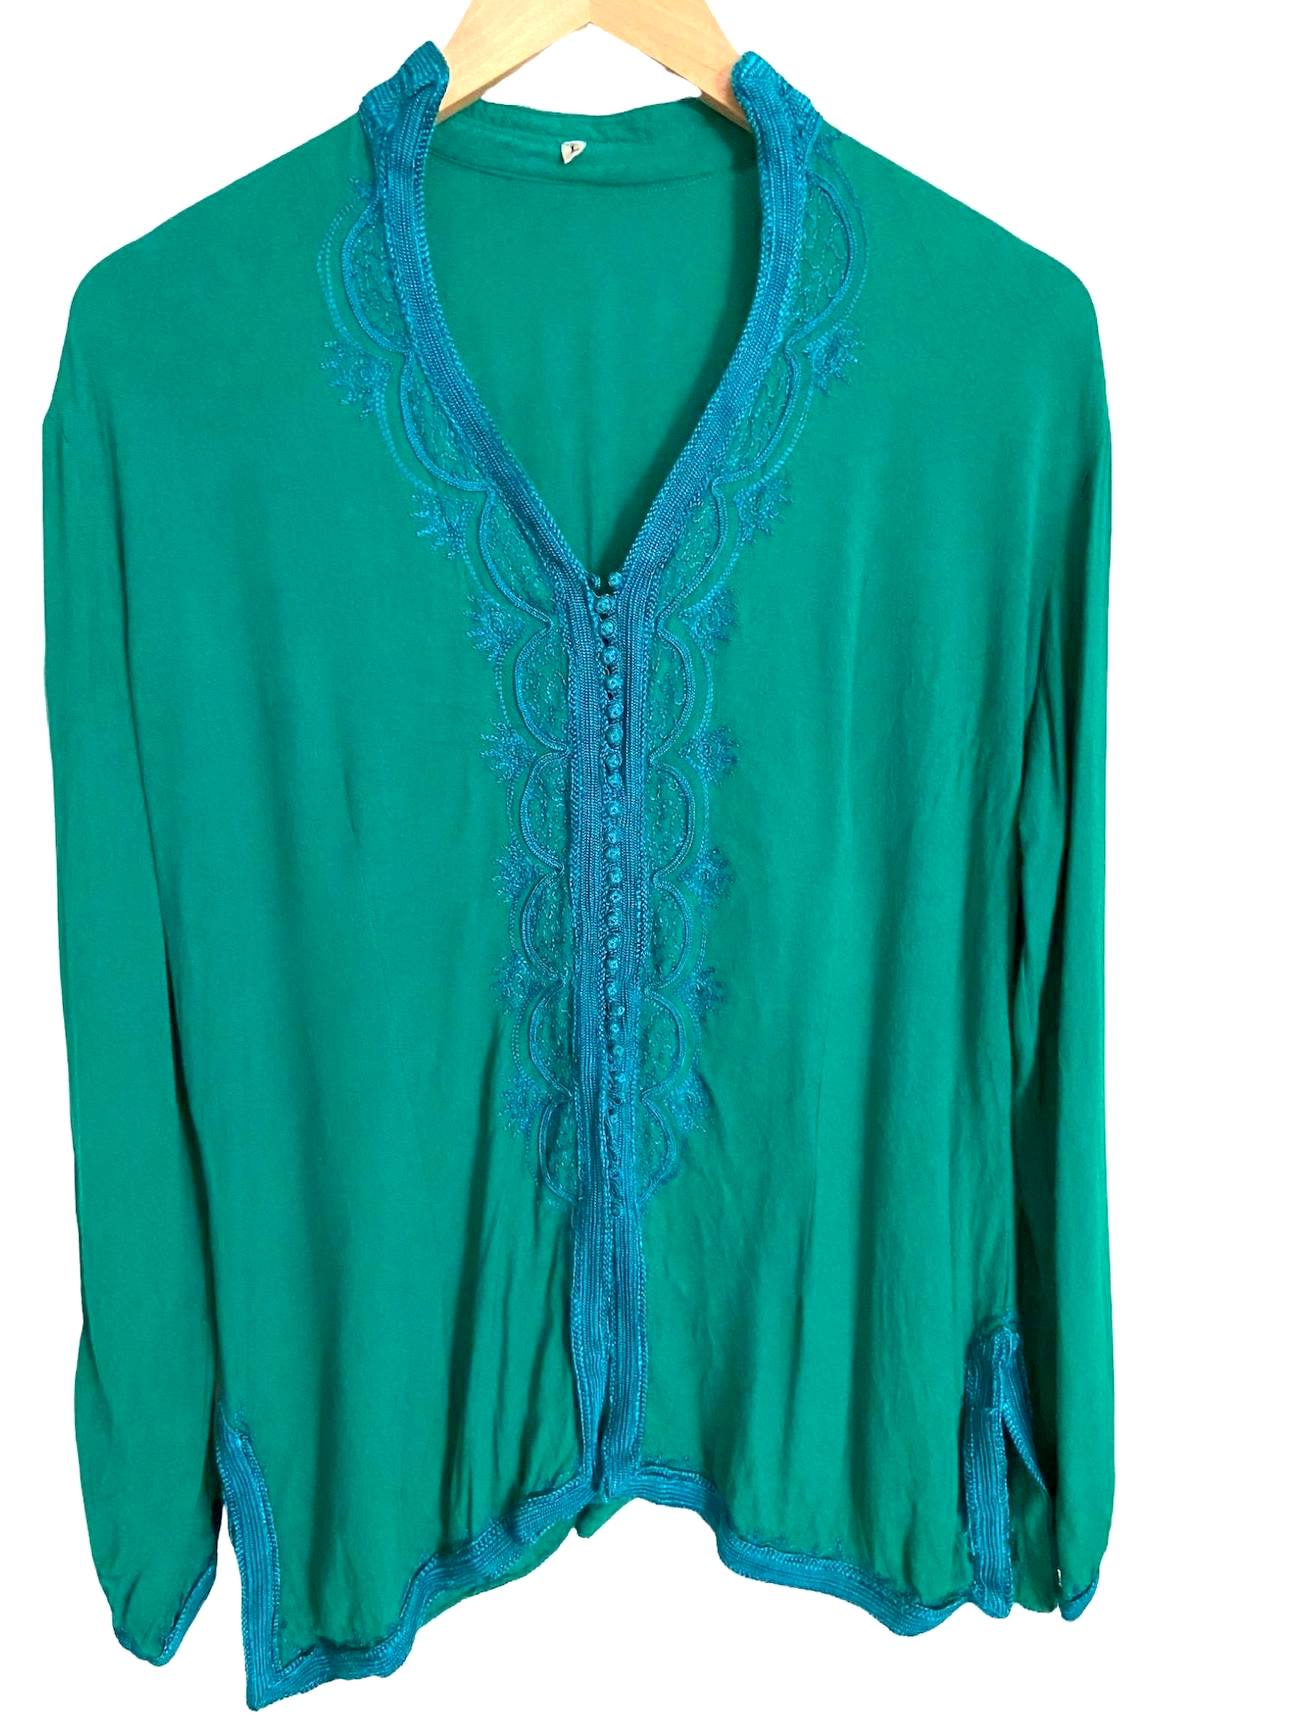 Cool Winter green embroidered blouse